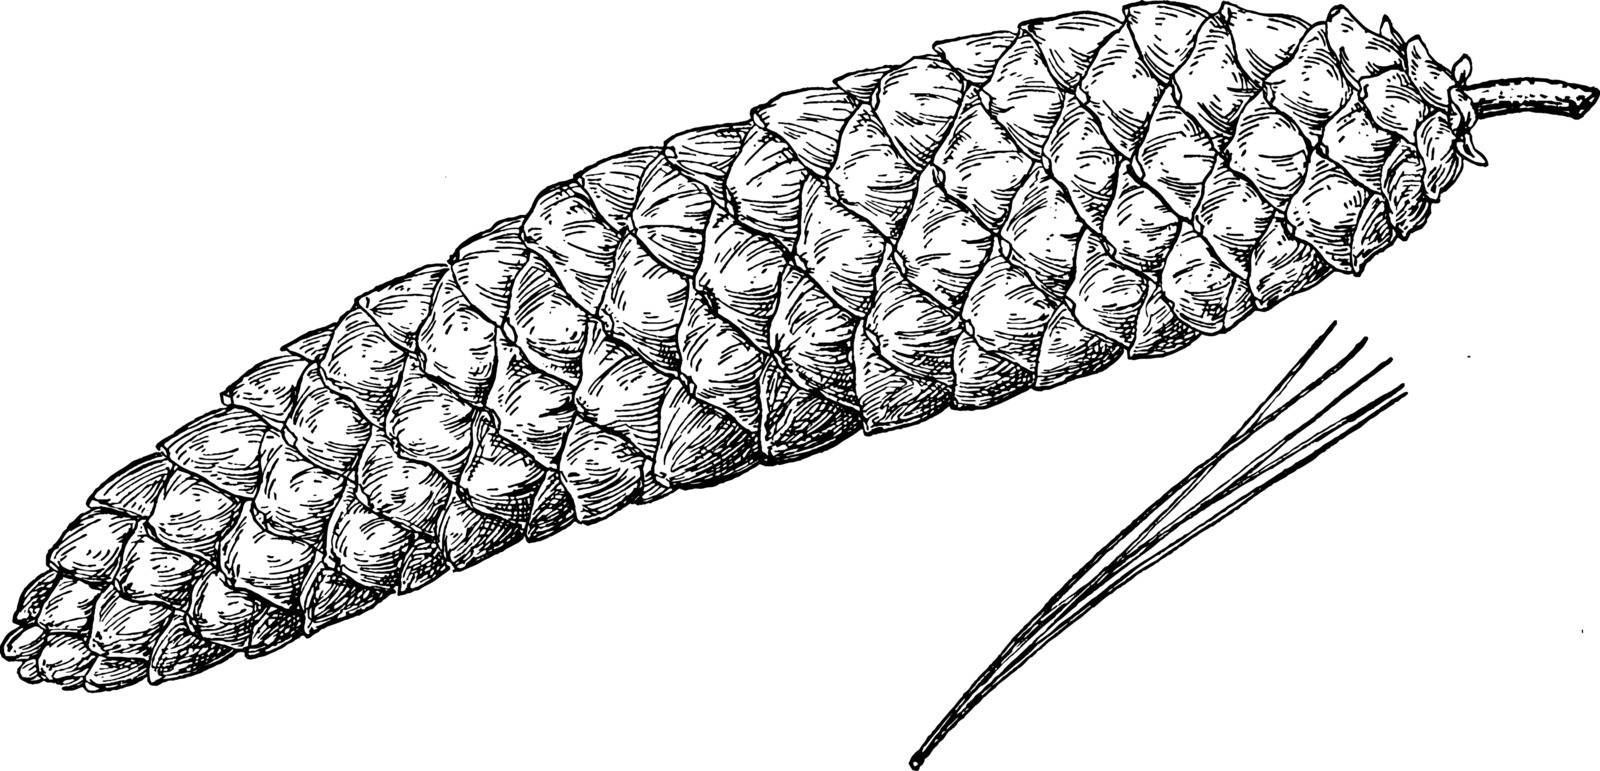 The pine cone of a sugar pine tree. These trees are also known as Pinus Lamertiana, vintage line drawing or engraving illustration.